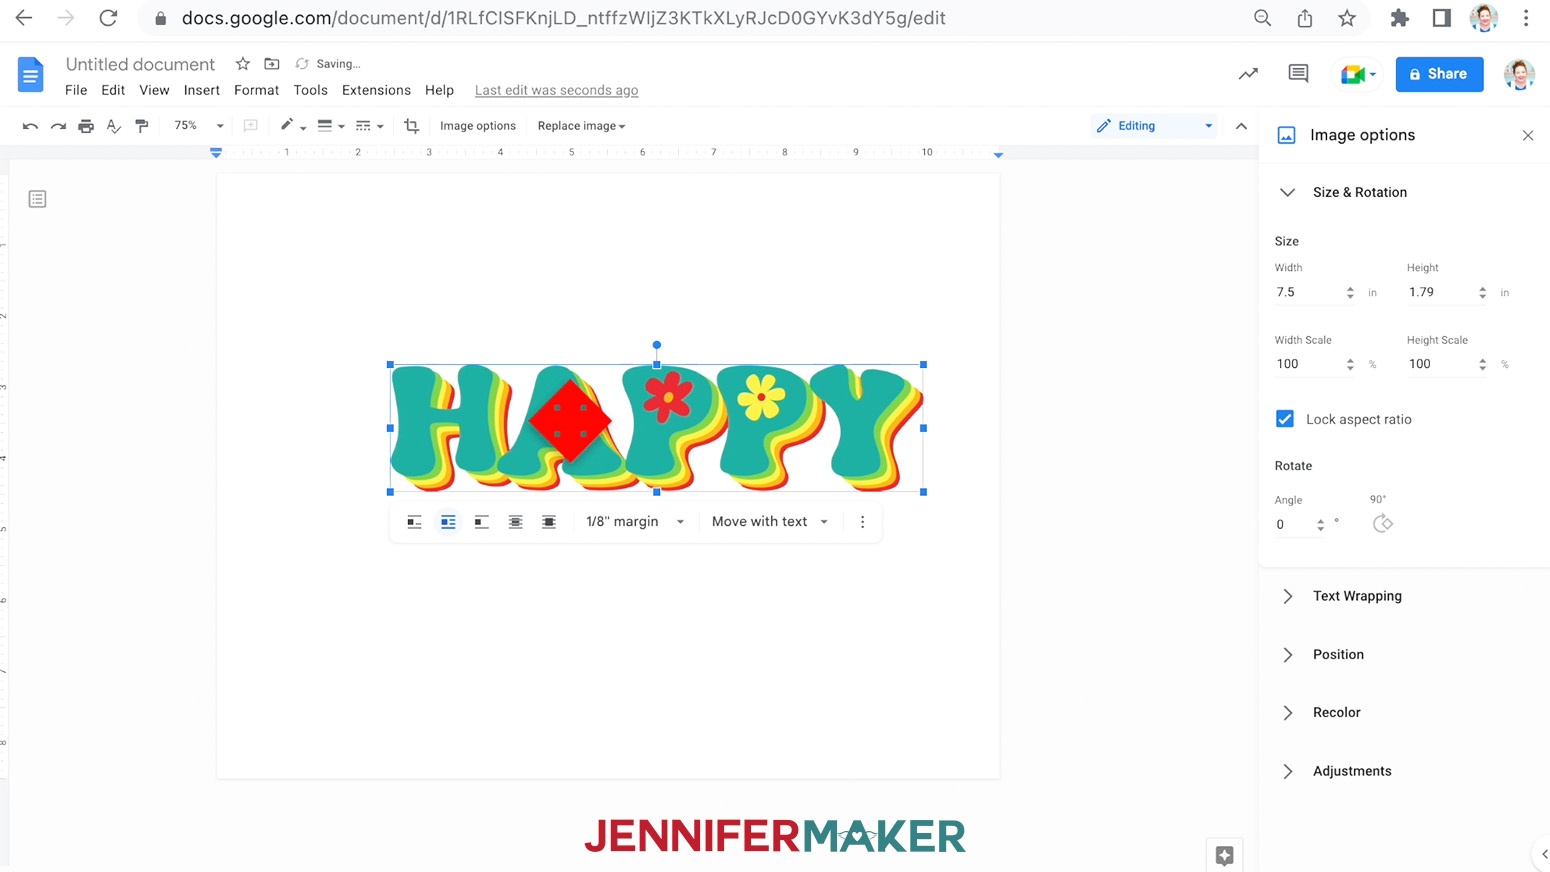 centering happy image on google docs page